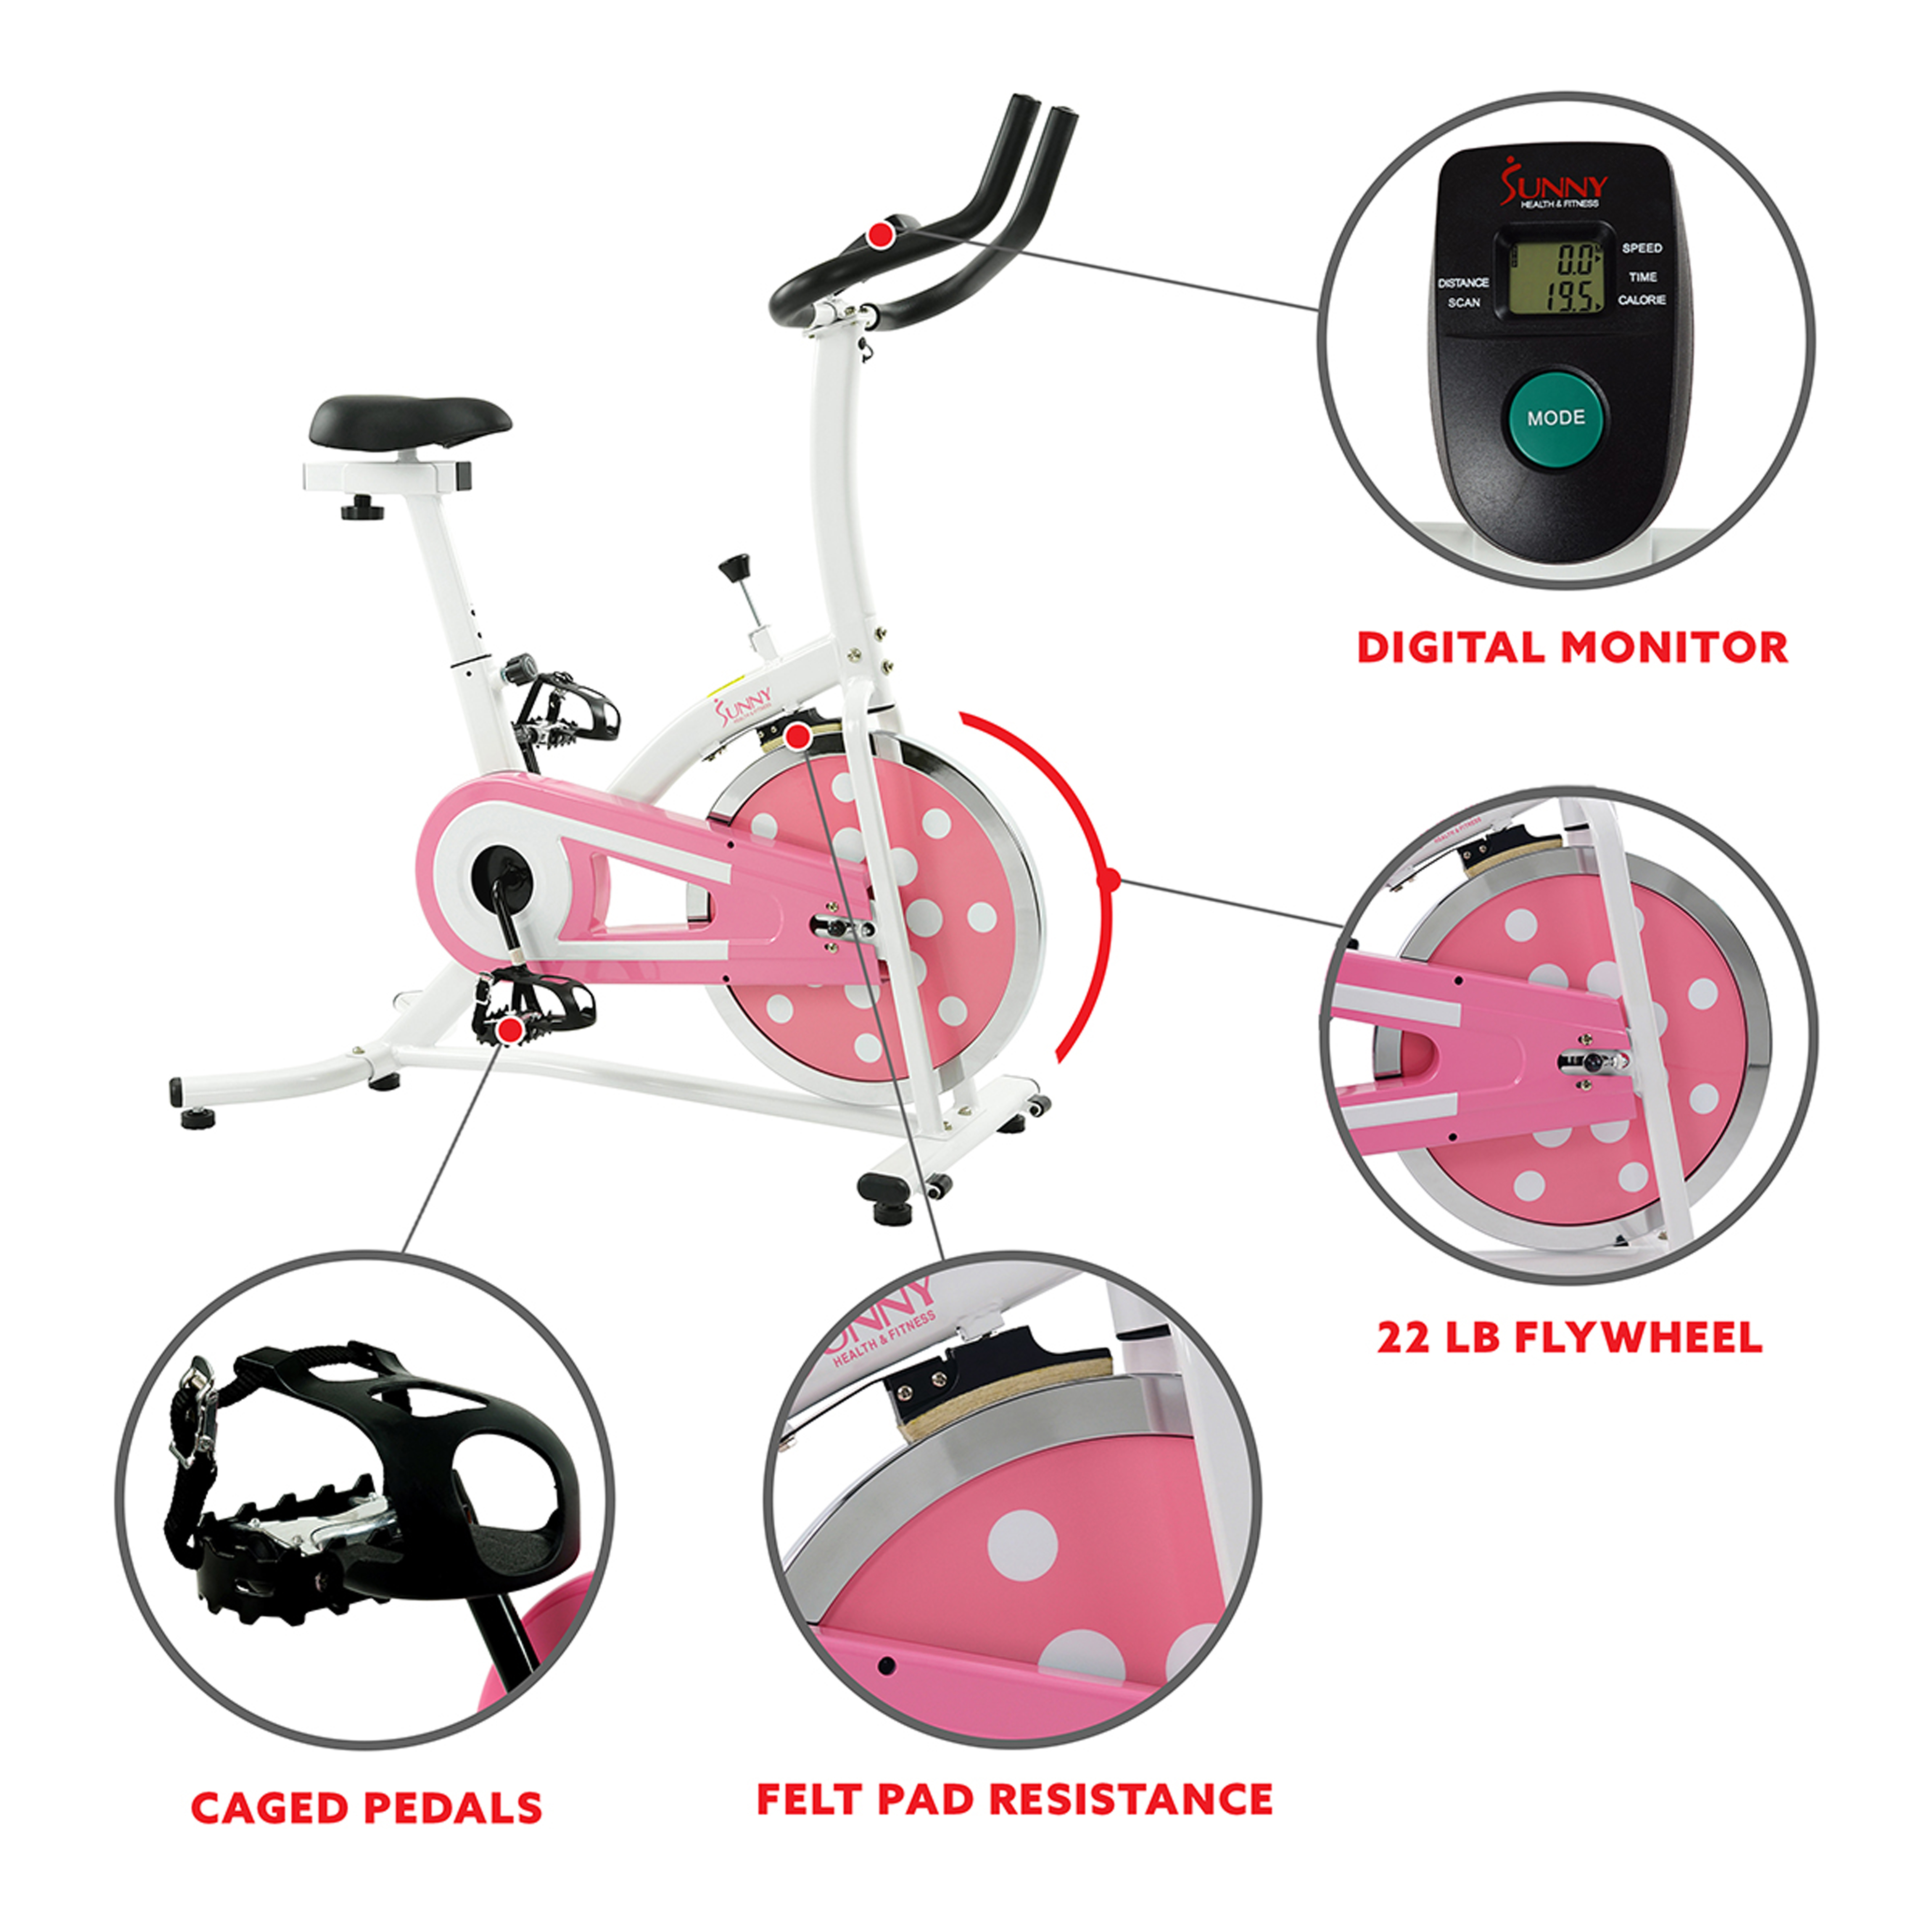 Sunny Health & Fitness Pink Chain Drive Indoor Cycling Exercise Stationary Bike w/ Monitor for Home Workout, Sport Training P8100 - image 4 of 8